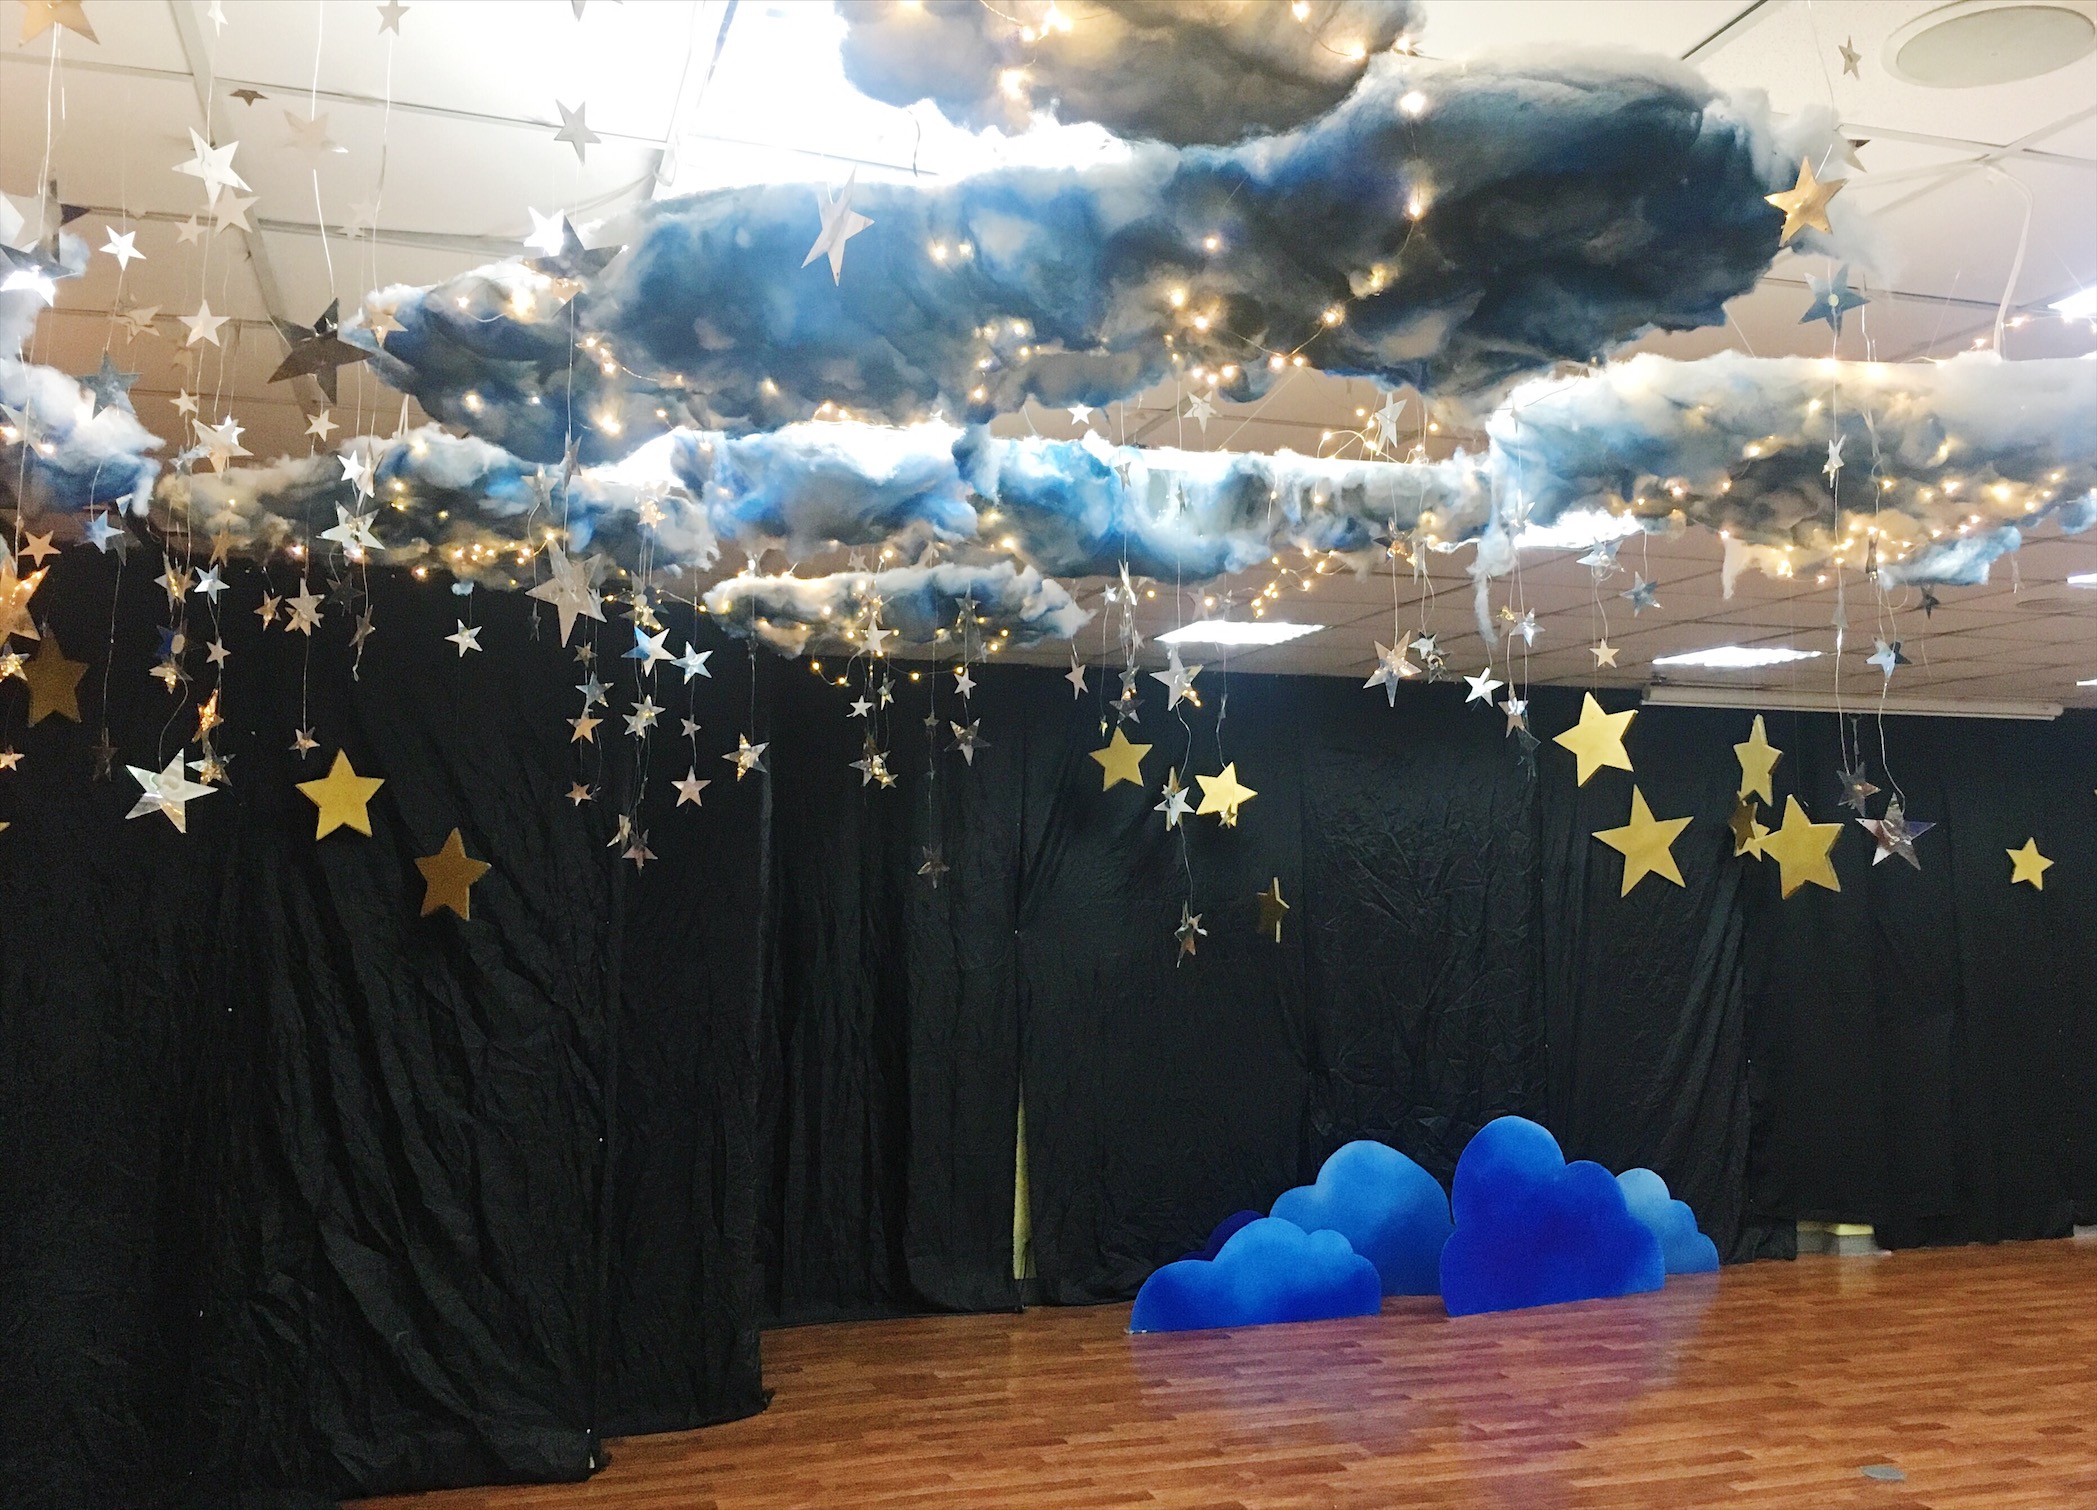 Decorations For Under The Stars Dinner Dance